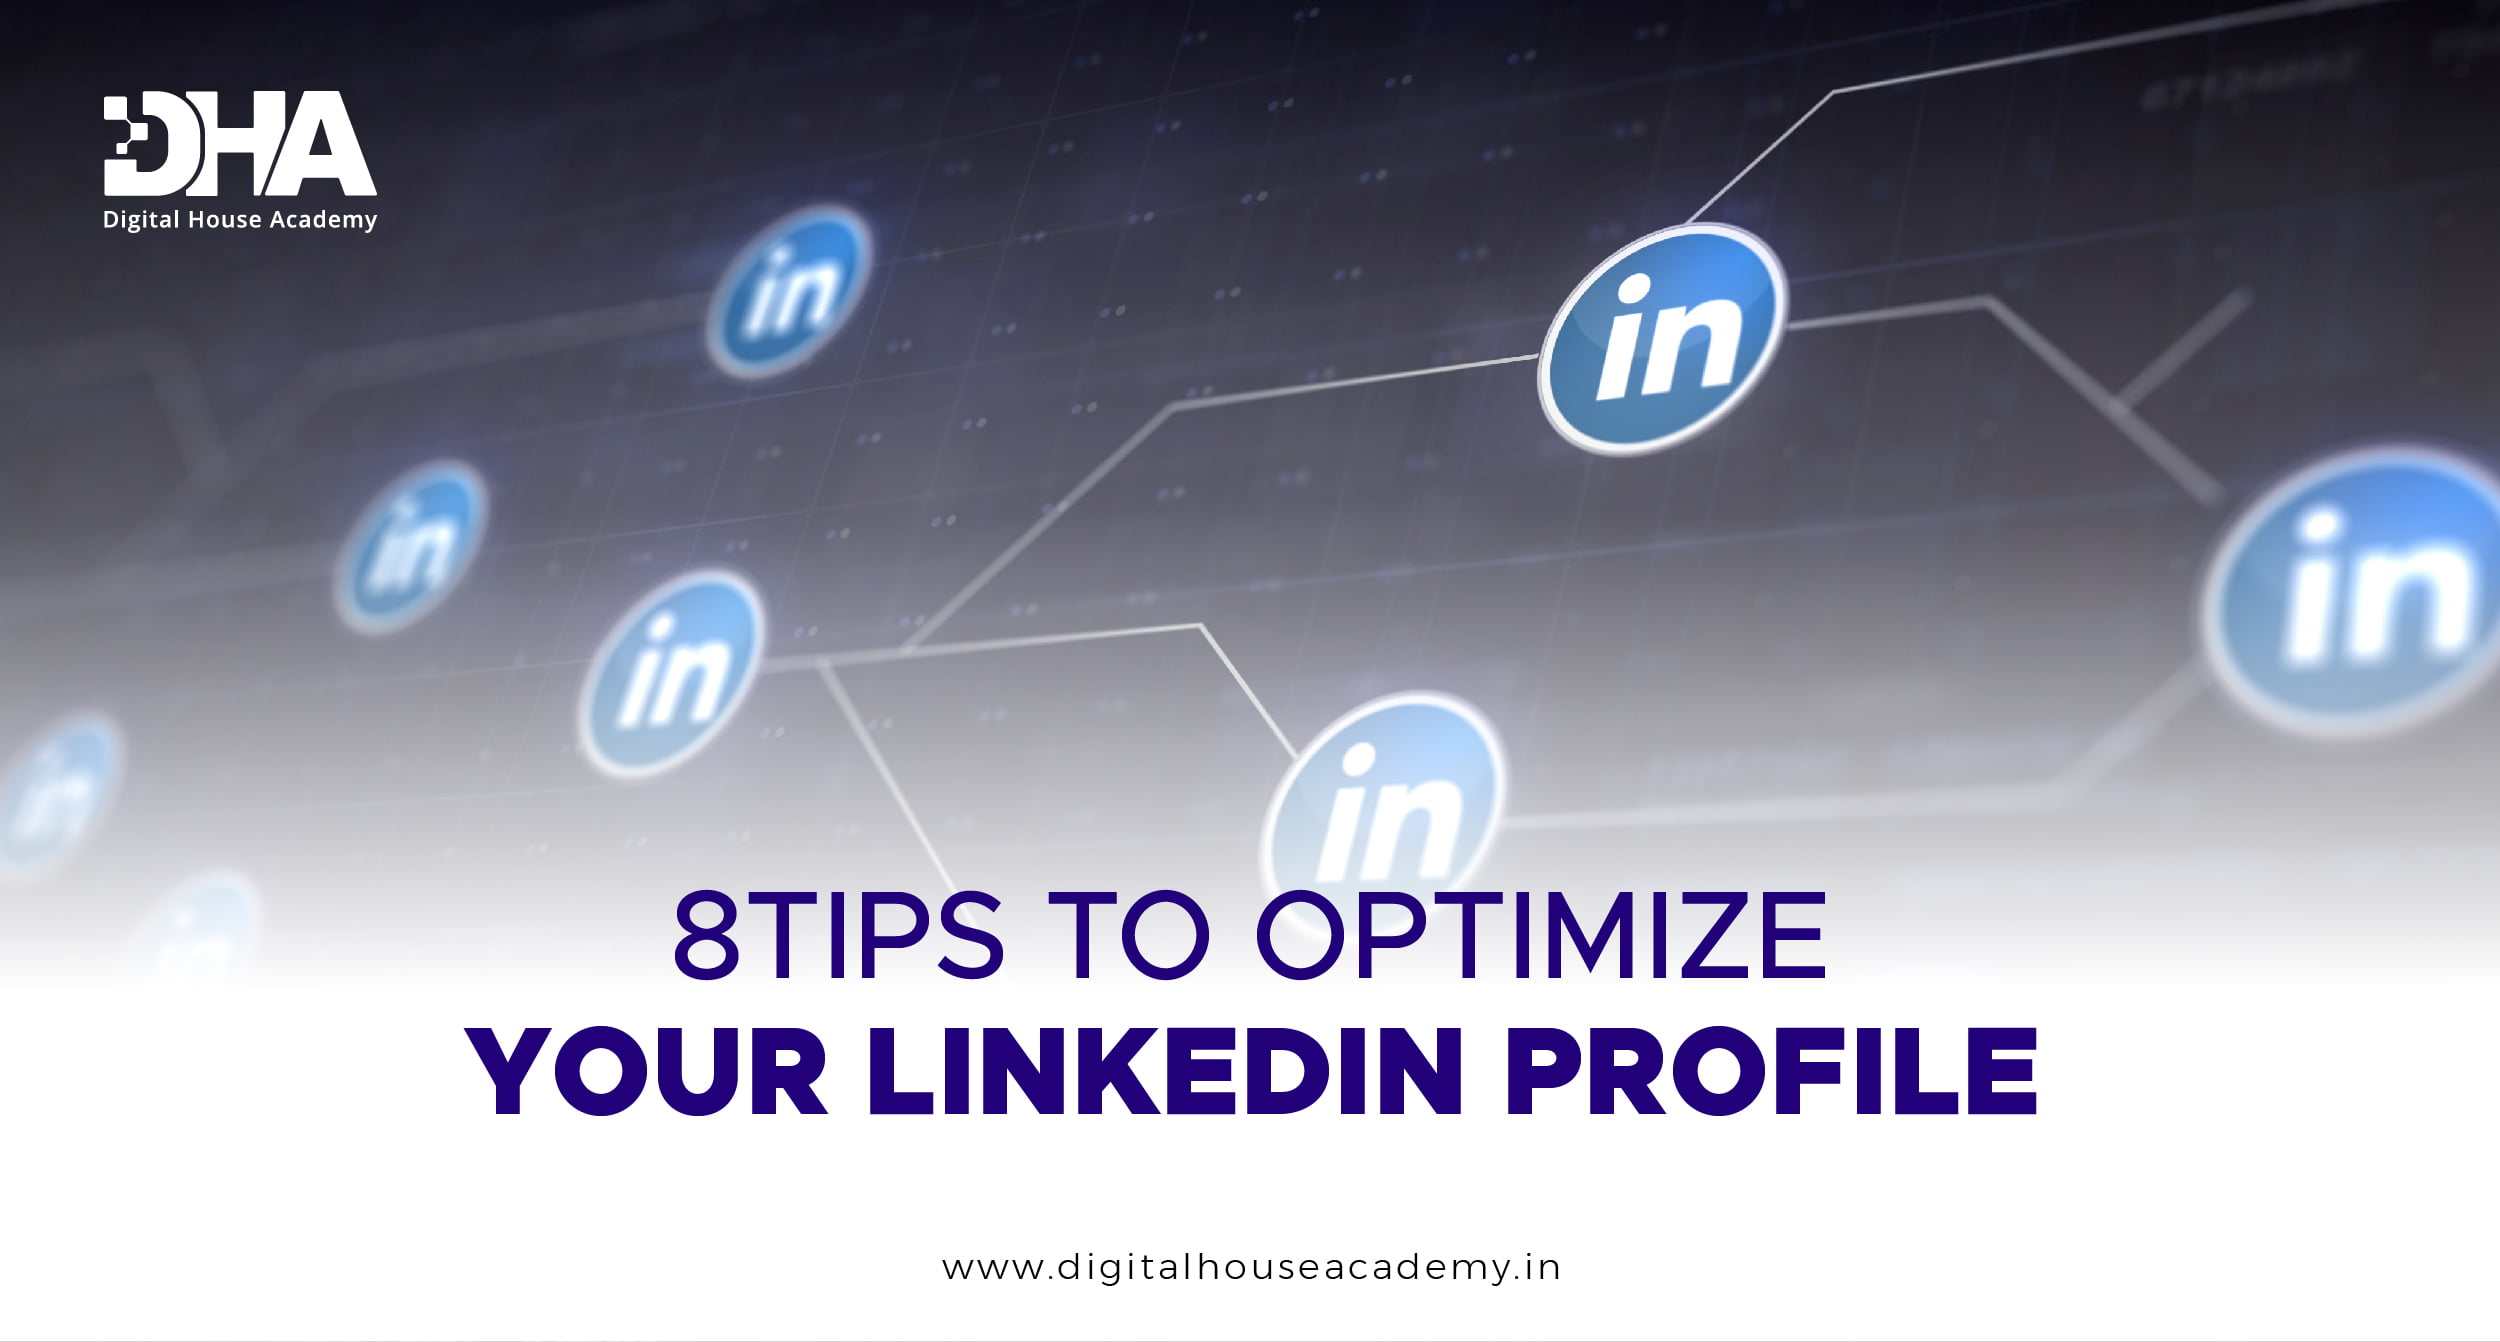 8 Tips to Optimize Your LinkedIn Profile